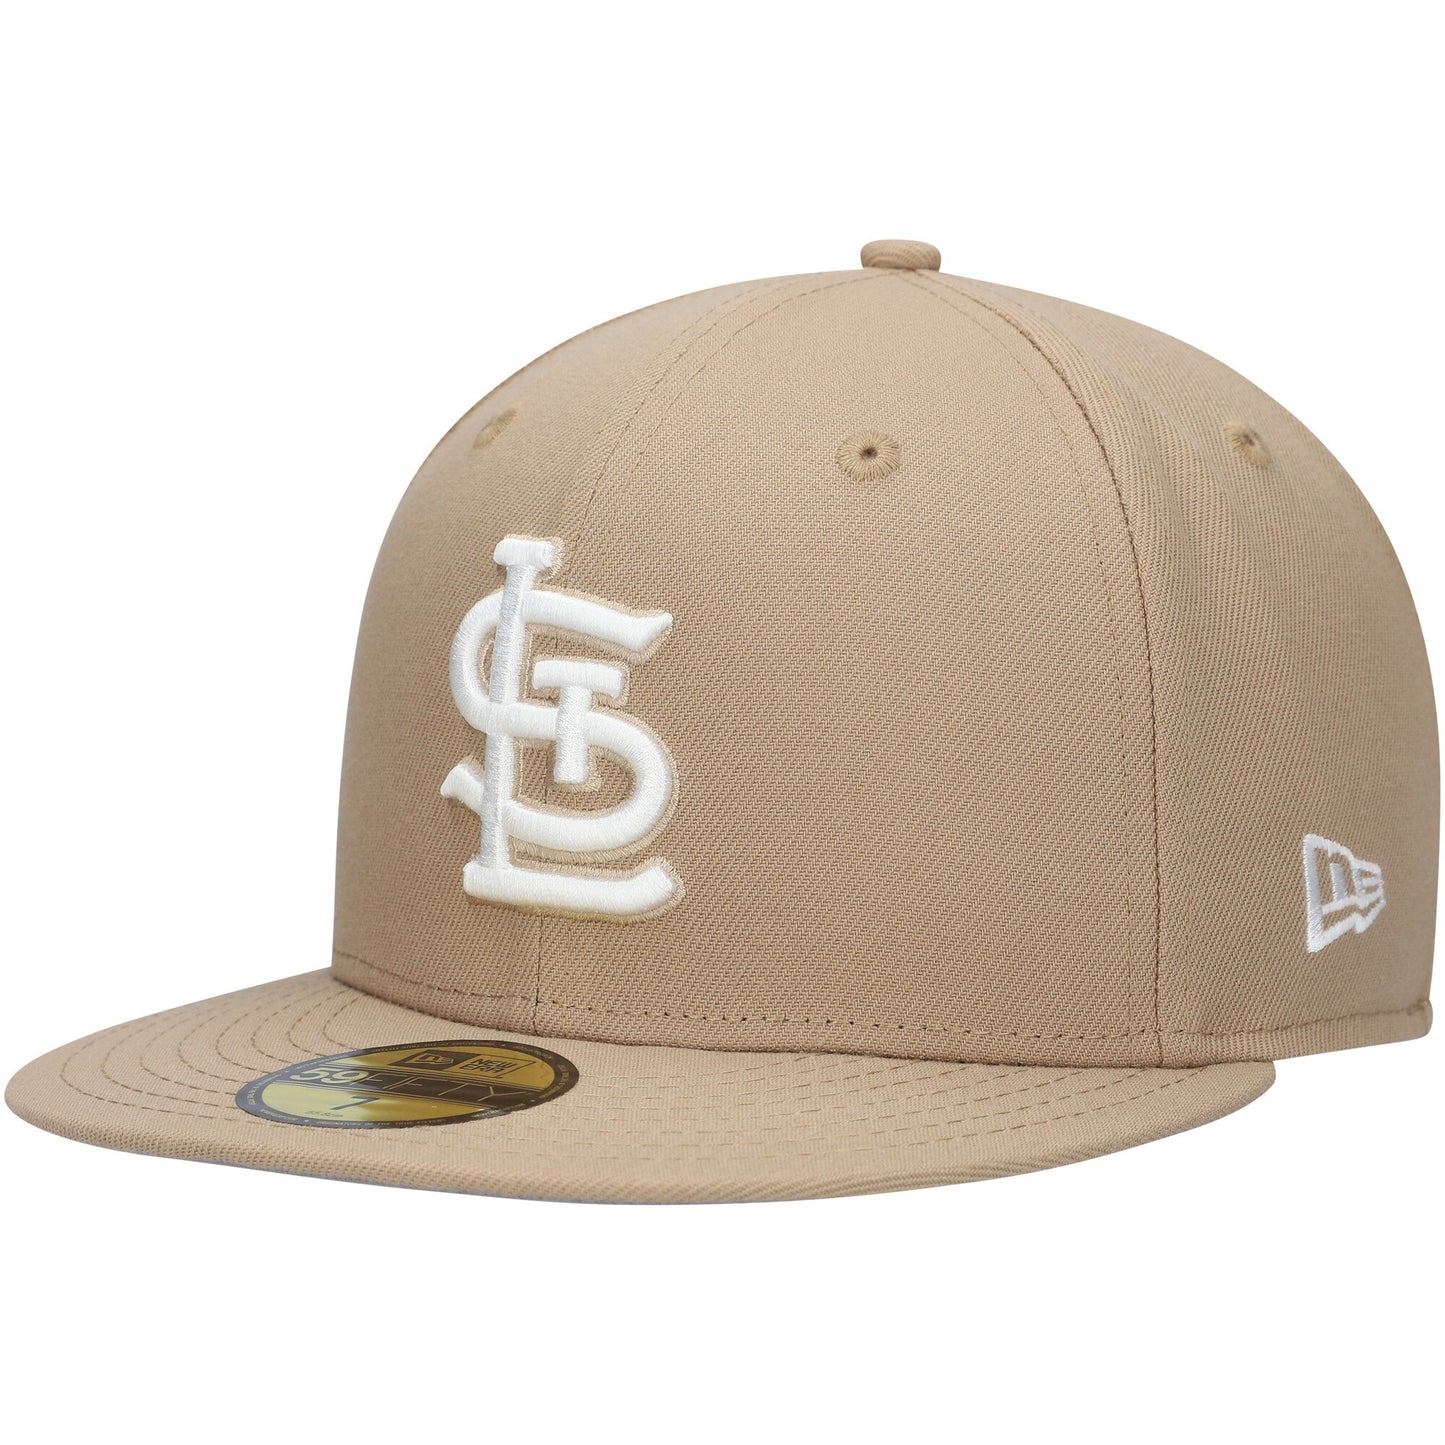 St. Louis Cardinals New Era 59FIFTY Fitted Hat - Khaki